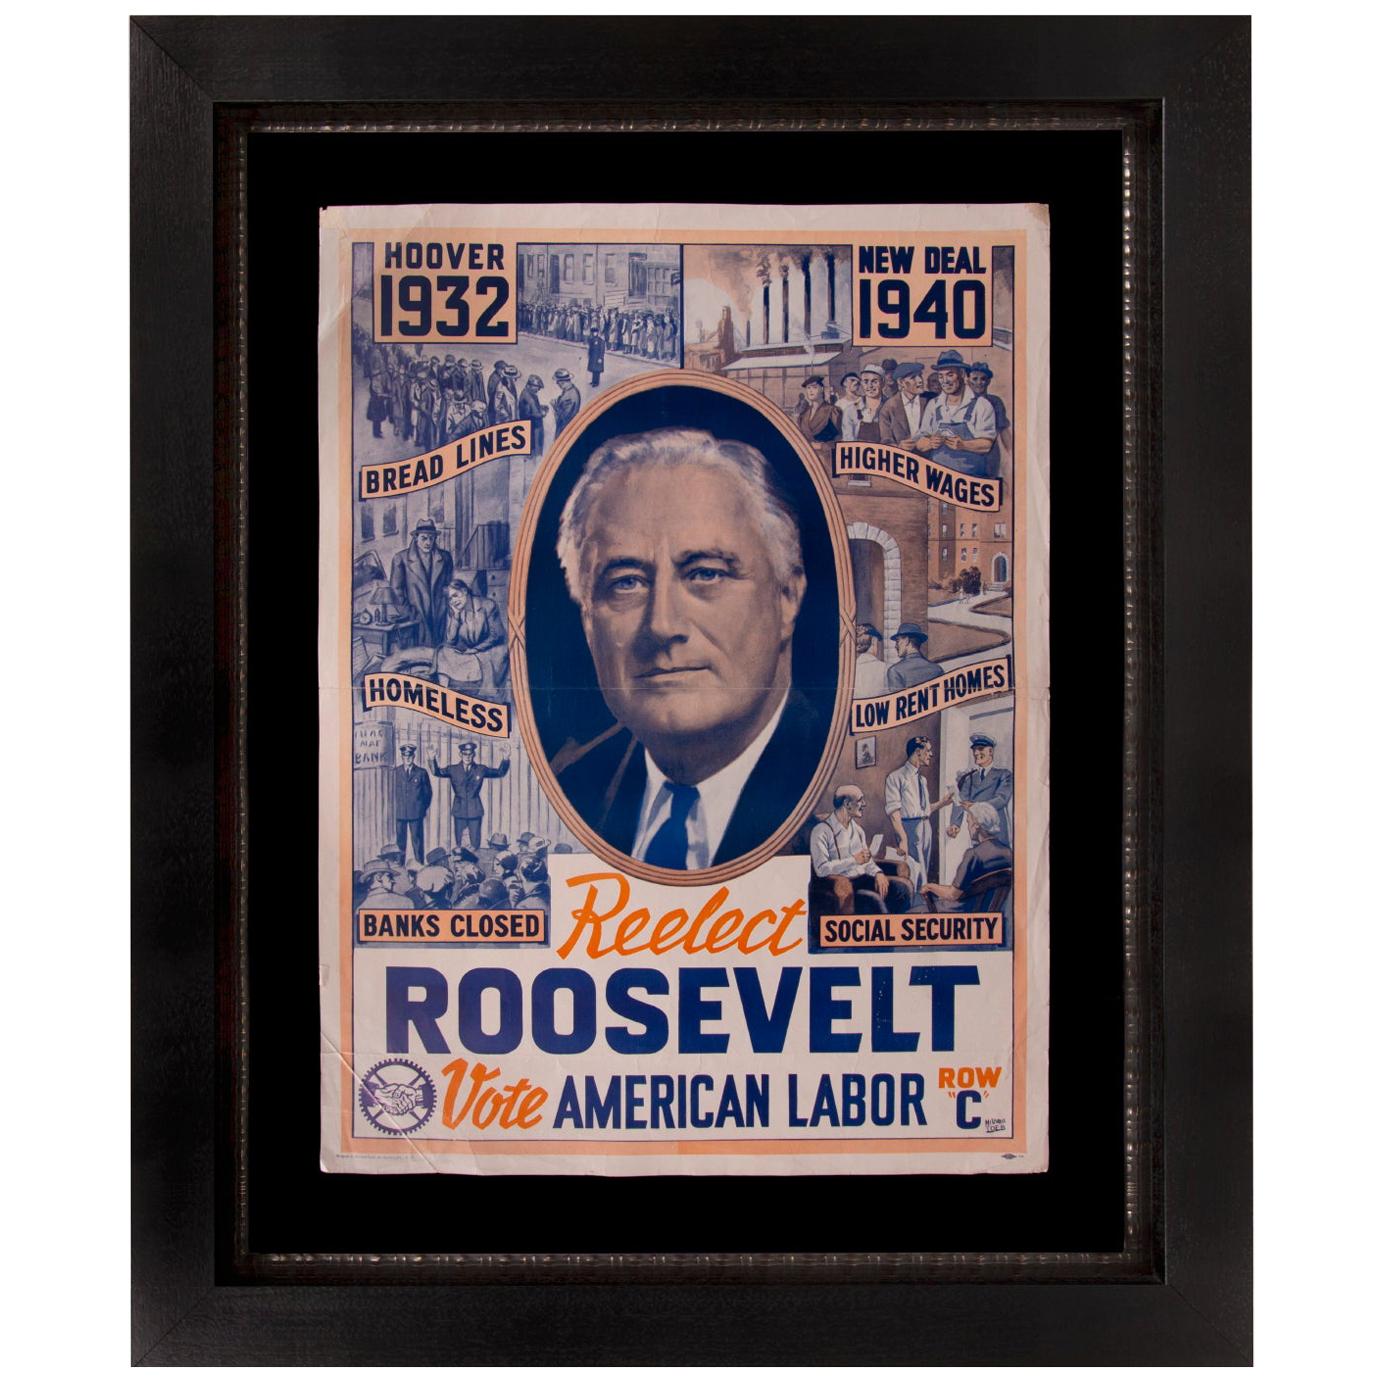 1940 Presidential Campaign Poster for FDR